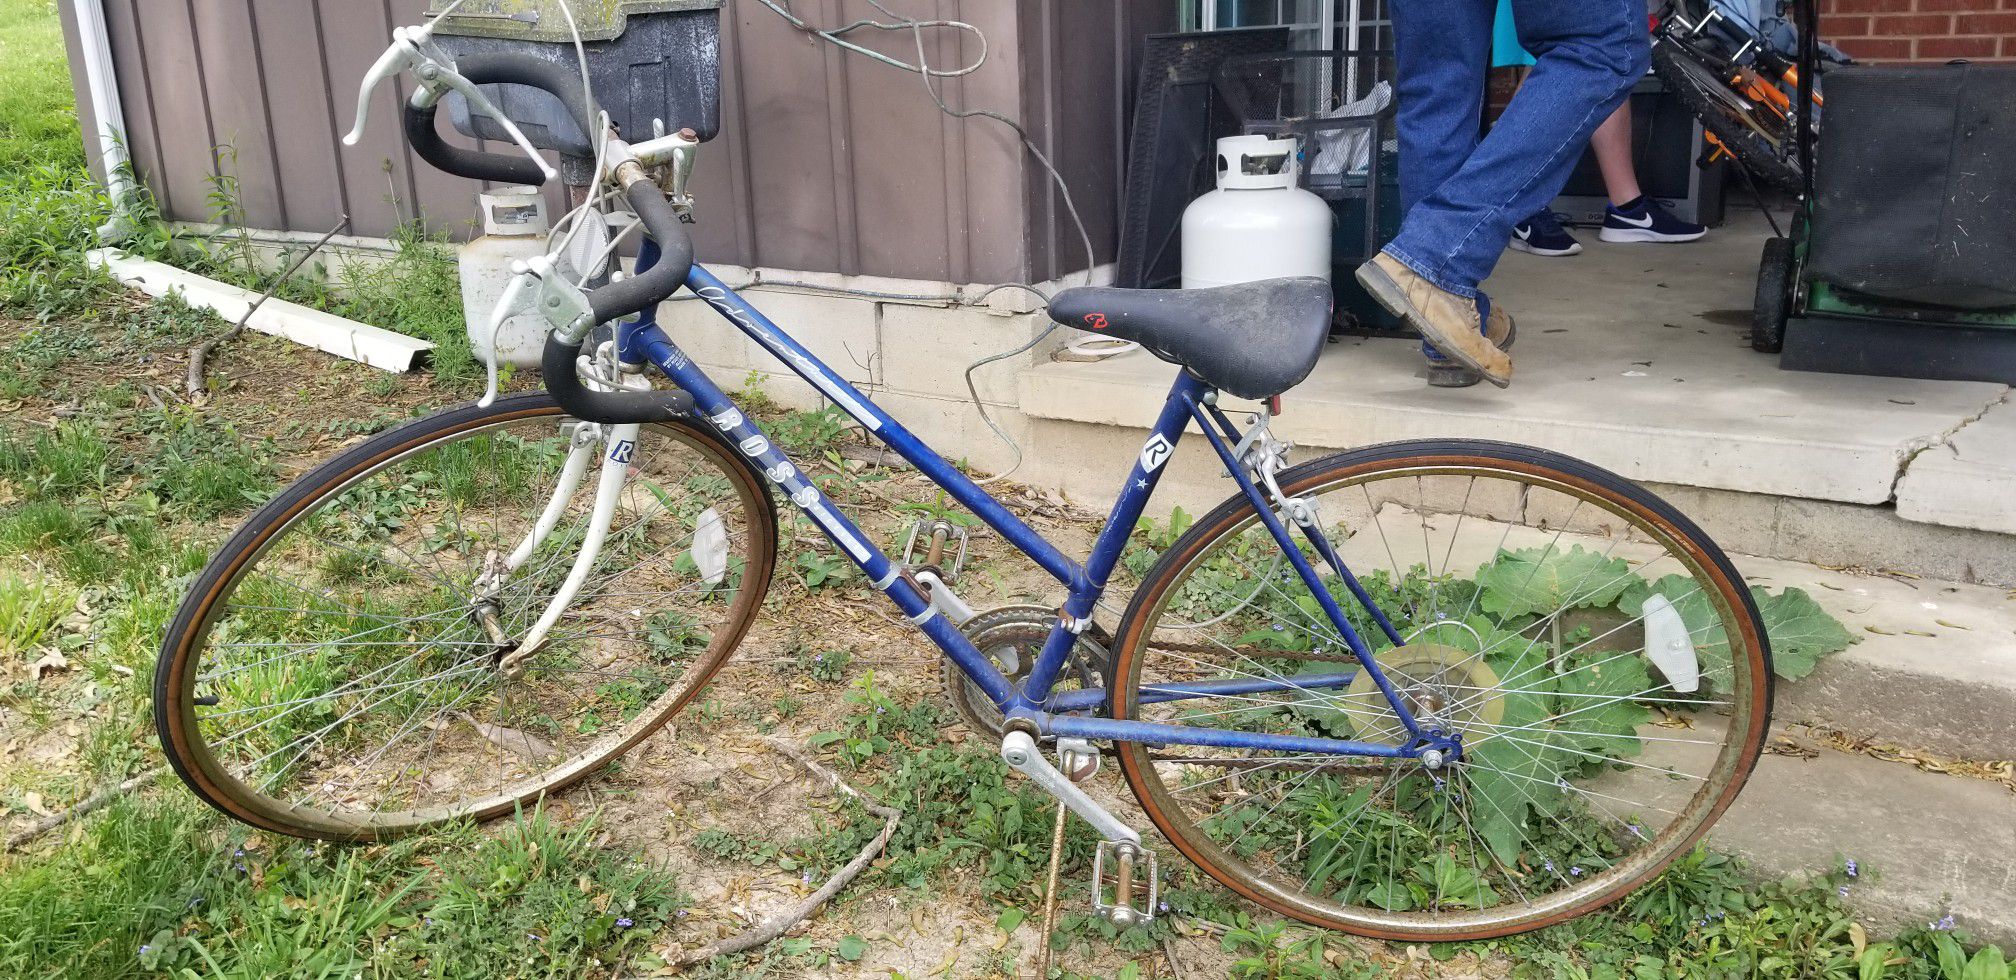 Ross Adventurer 10 speed womans bike. Circa 1988...In fair condition. Needs TLC, new tires and brakes.